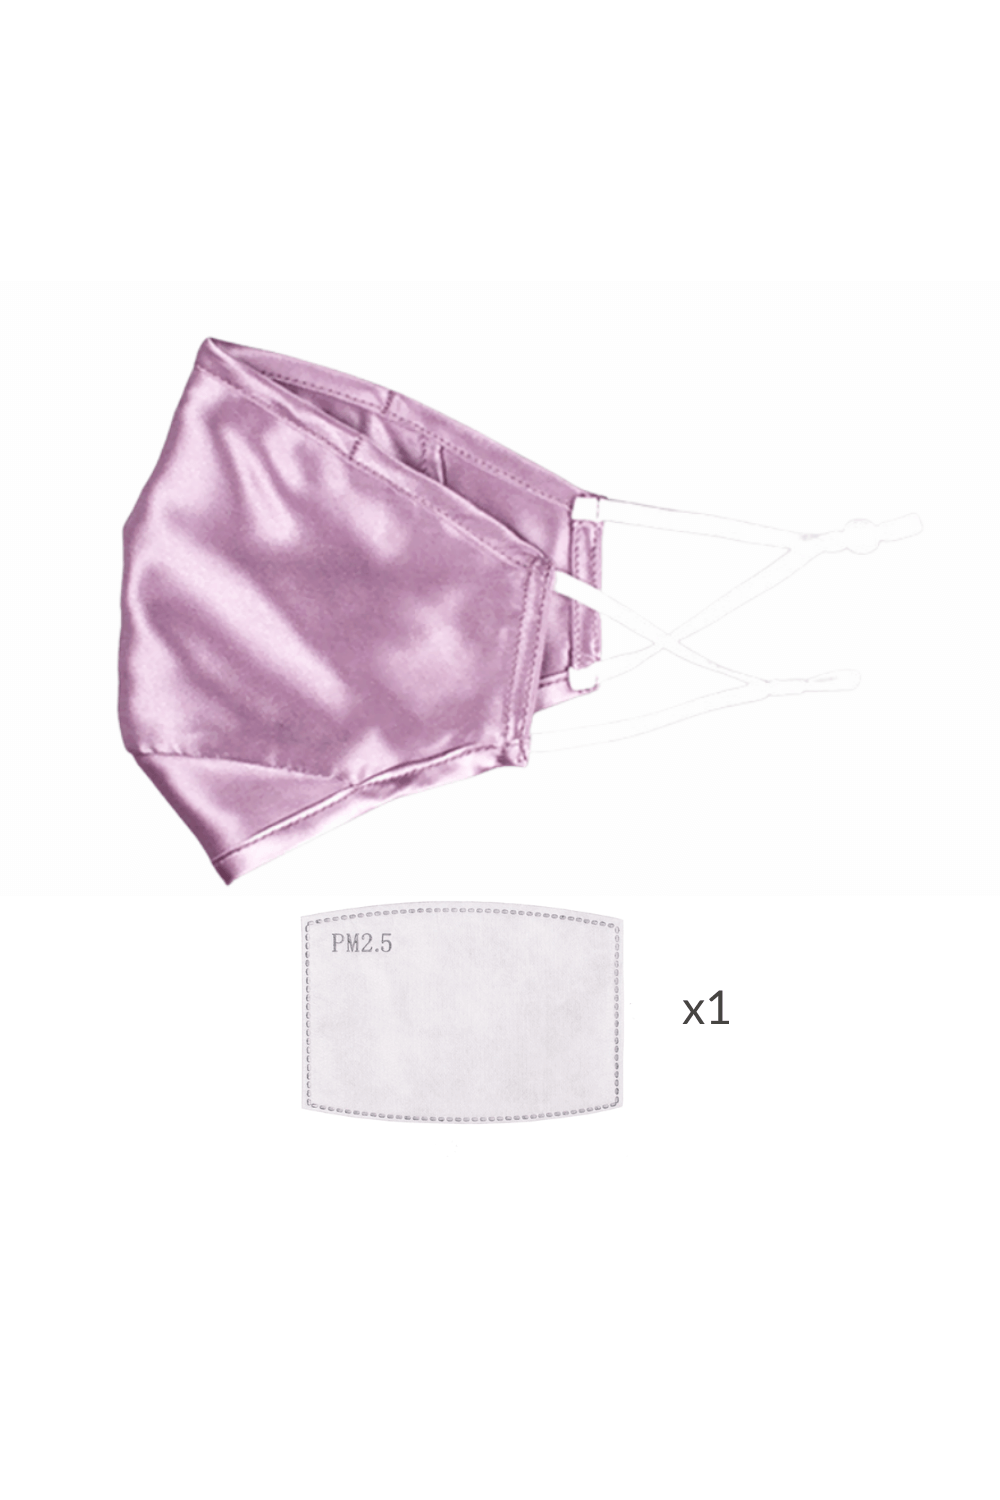 ULTRA Silk Face Mask - Lilac (with Filter Pocket and Nose Wire) - BASK™